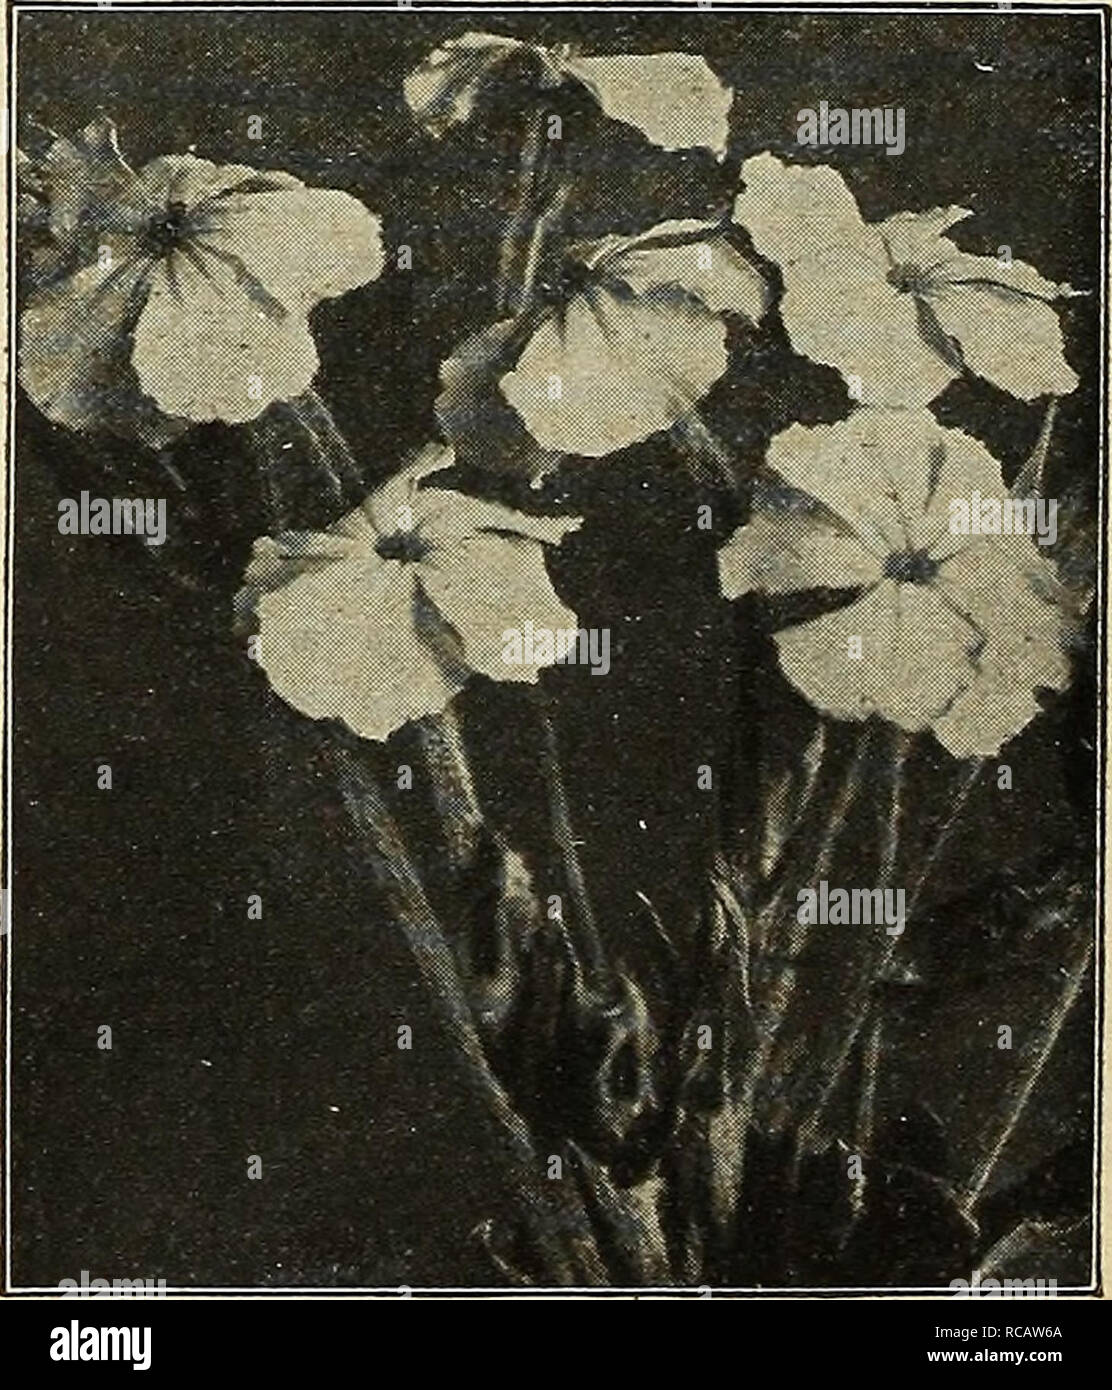 . Dreer's garden book 1916. Seeds Catalogs; Nursery stock Catalogs; Gardening Equipment and supplies Catalogs; Flowers Seeds Catalogs; Vegetables Seeds Catalogs; Fruit Seeds Catalogs. Achillea Millefolium Roseum (Offered on page 197) ADENOPHORA. Megalantha. A new variety, produc- ing from June to October large, attrac- tive porcelain-blue blossoms. 35 cts. each; $3.50 per doz. Potatlini. An easily-grown, useful, attractive plant, with light blue flowers, not unlike Canterbury bells; July to September; 18 inches. 25 cts. each; $2.50 per doz. ADONIS (Bird's Eye). One of the choicest of early spr Stock Photo